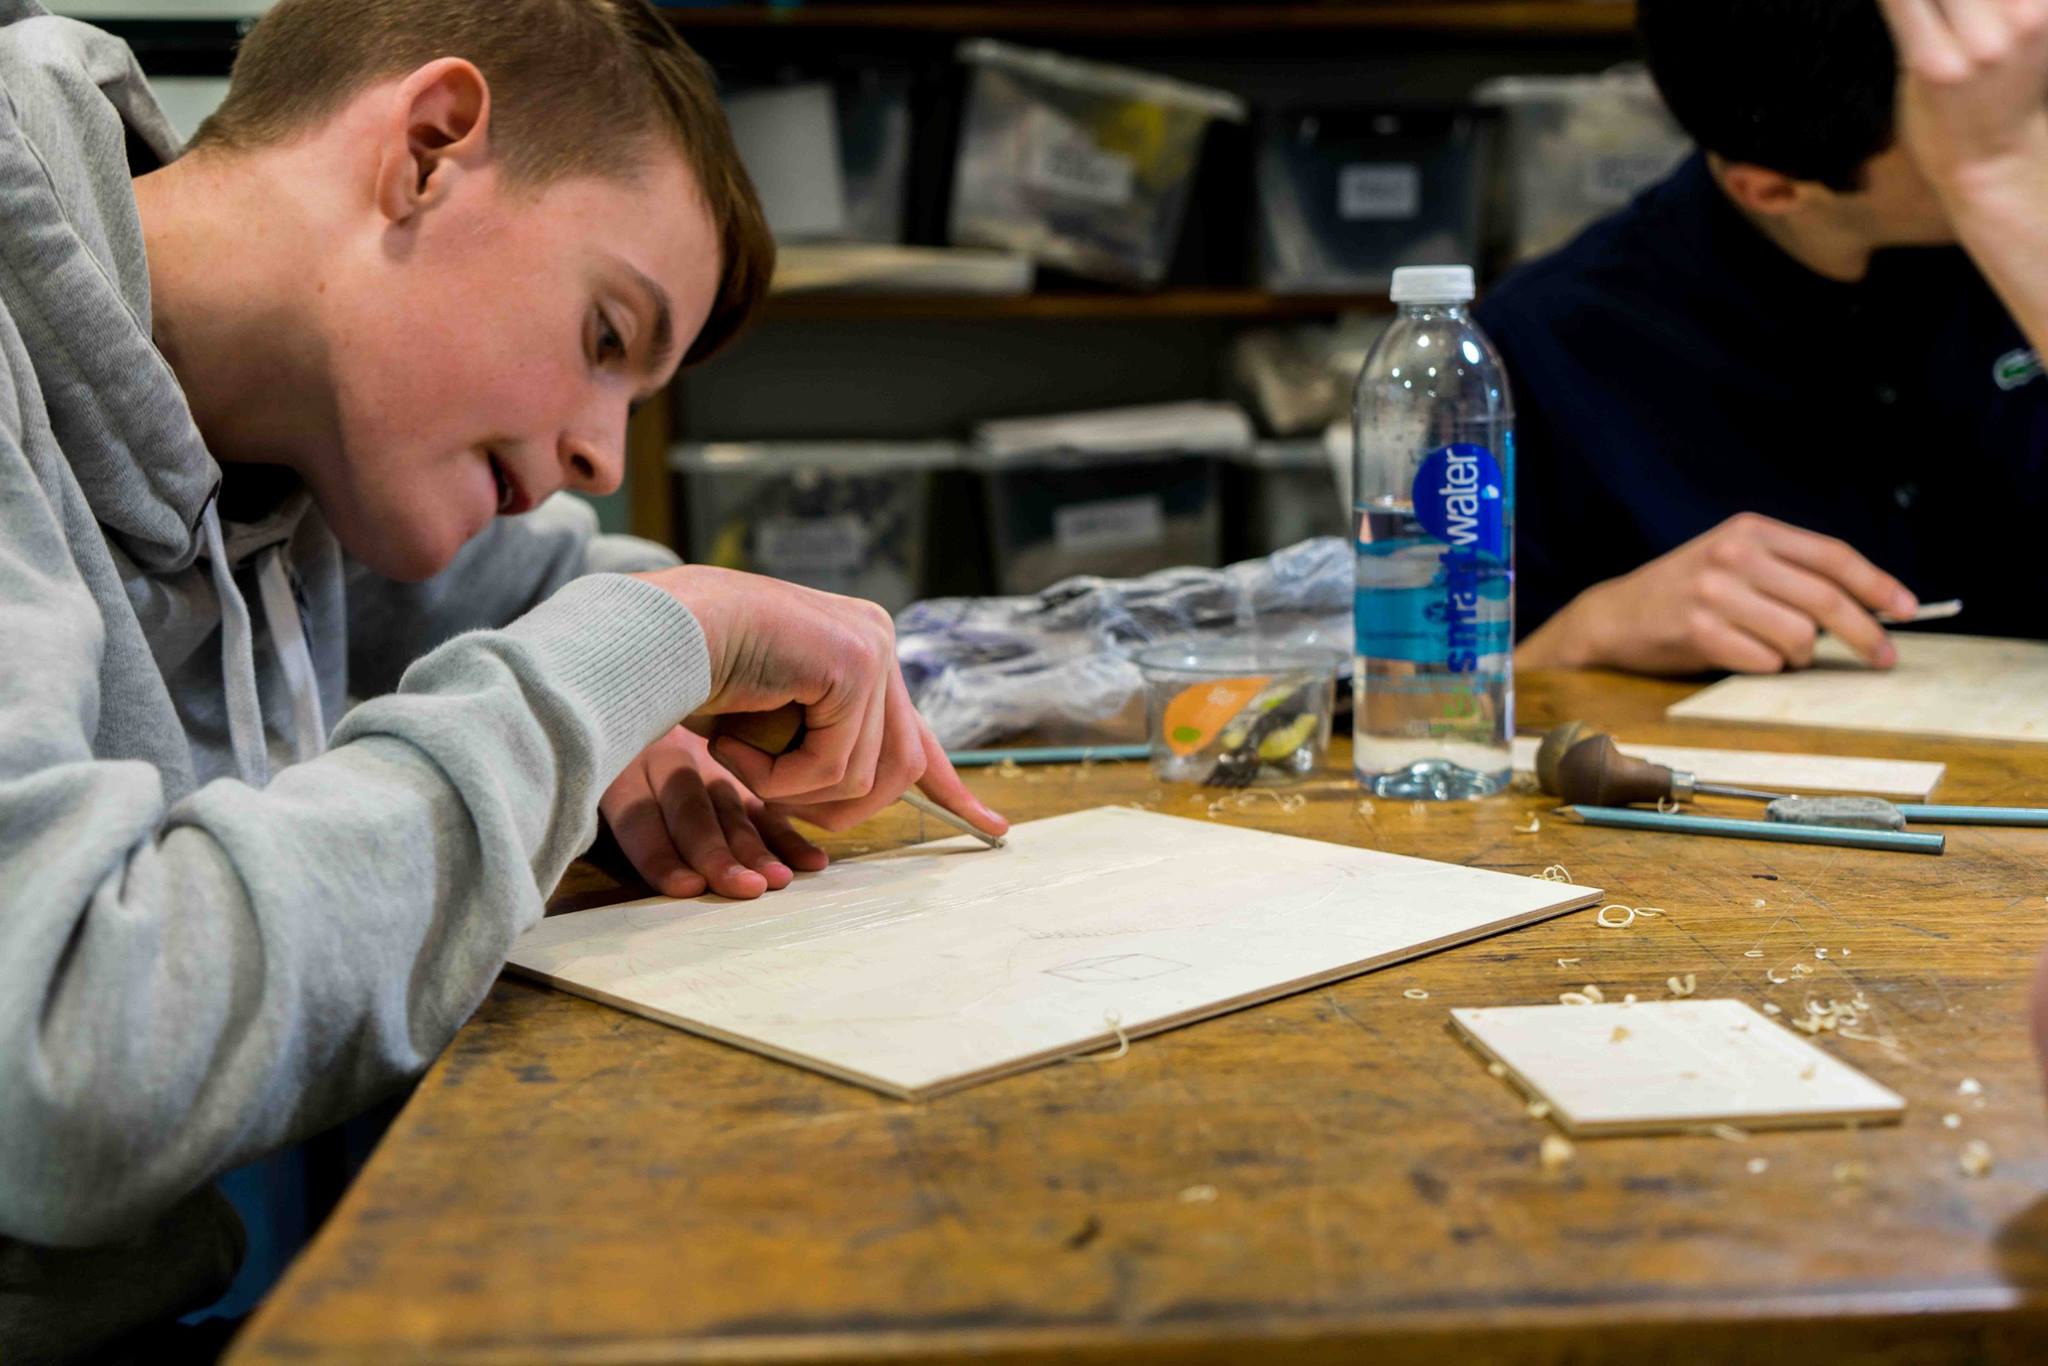 A student creating artwork